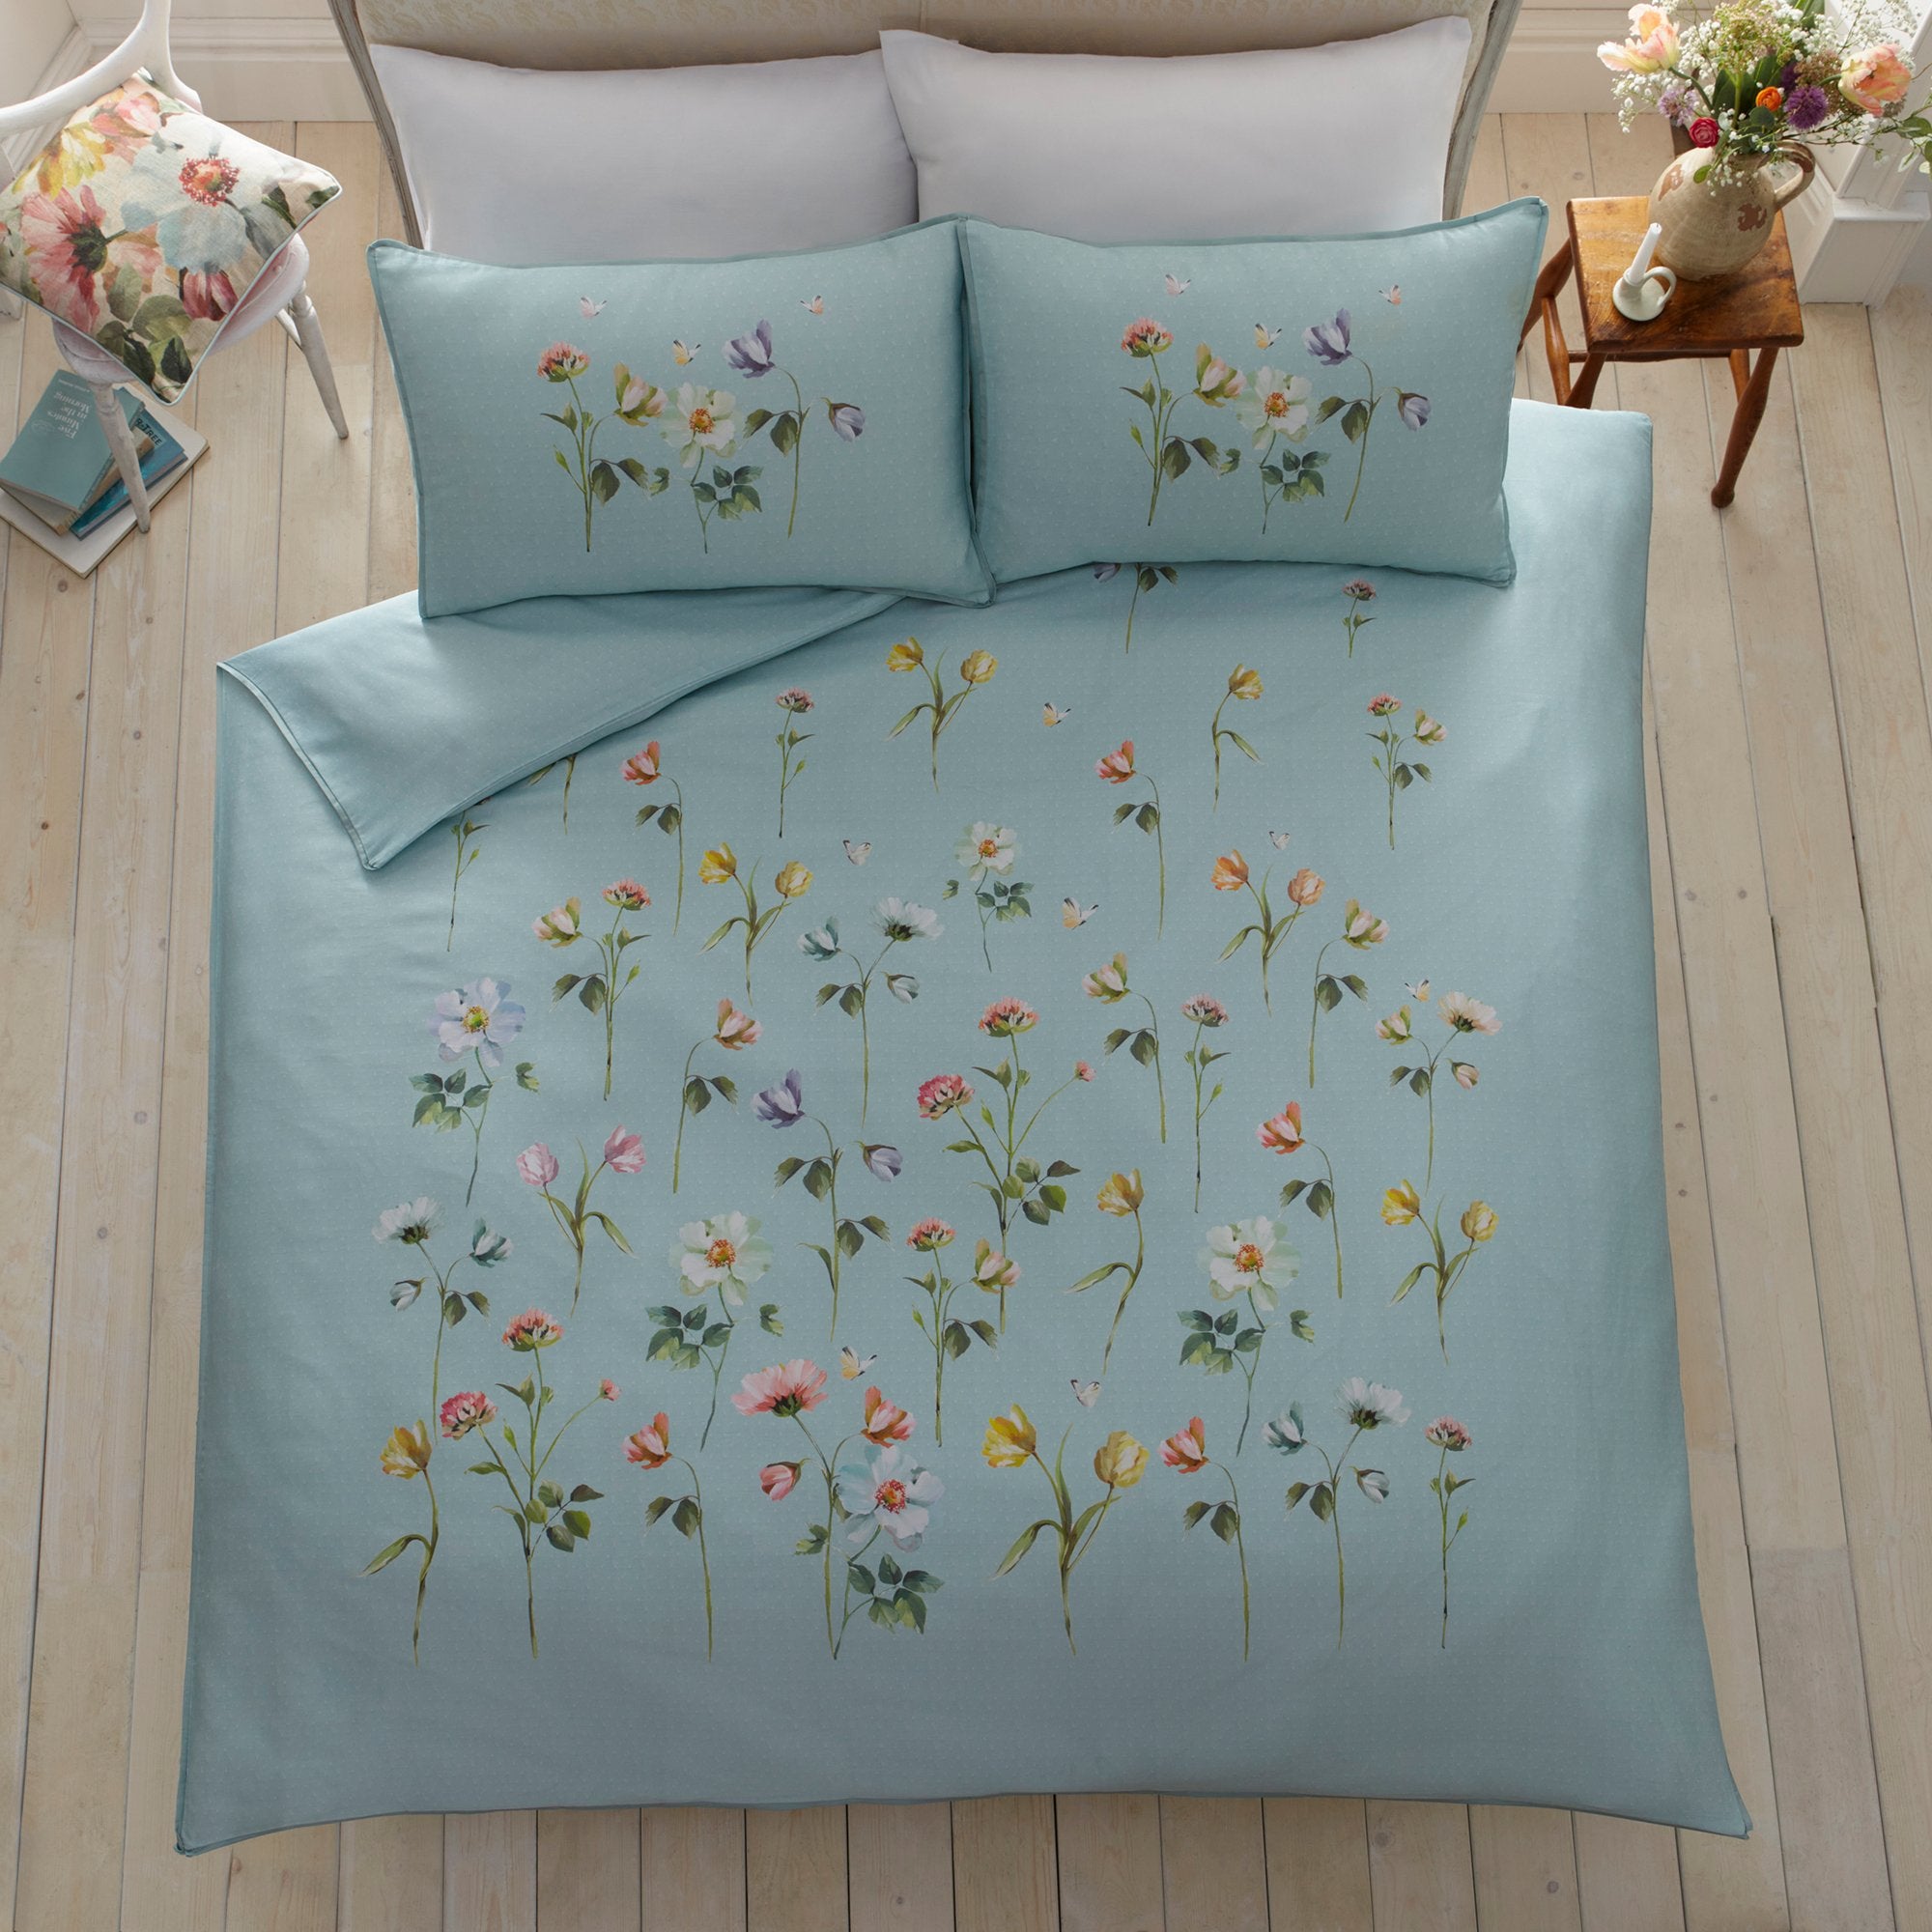 Duvet Cover Set Serenity by Appletree Heritage in Duck Egg